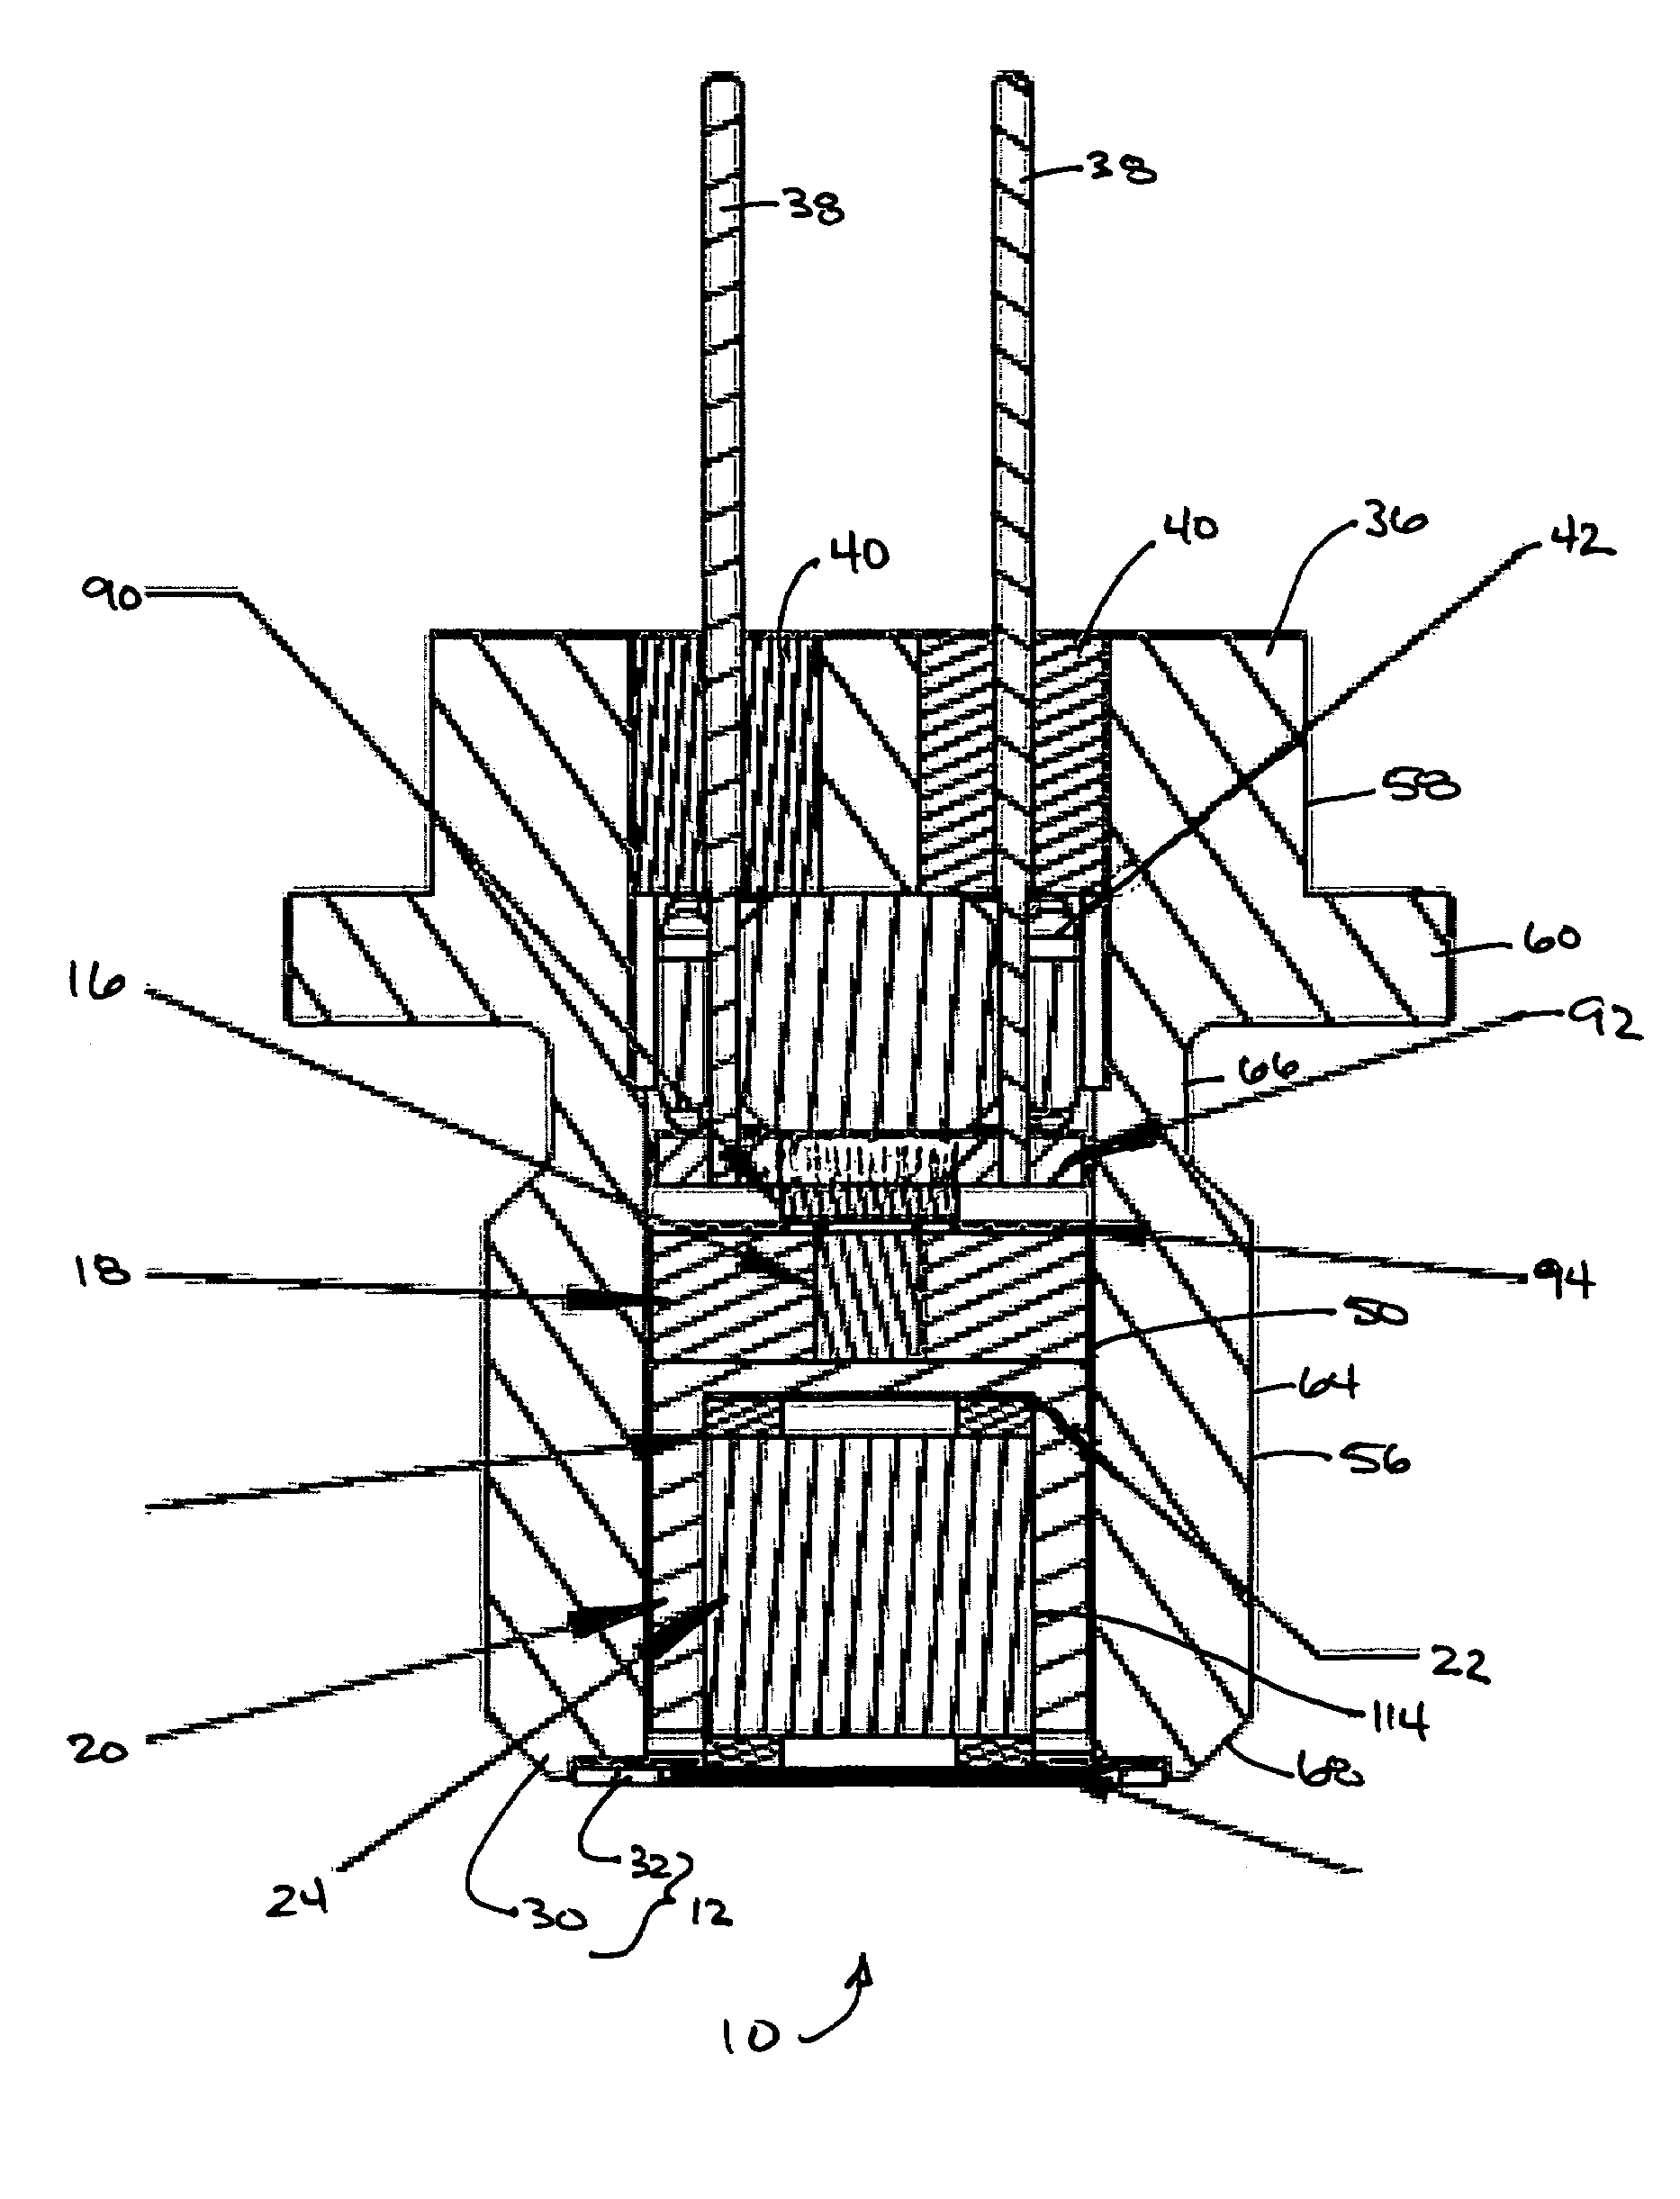 Energetic material initiation device utilizing exploding foil initiated ignition system with secondary explosive material